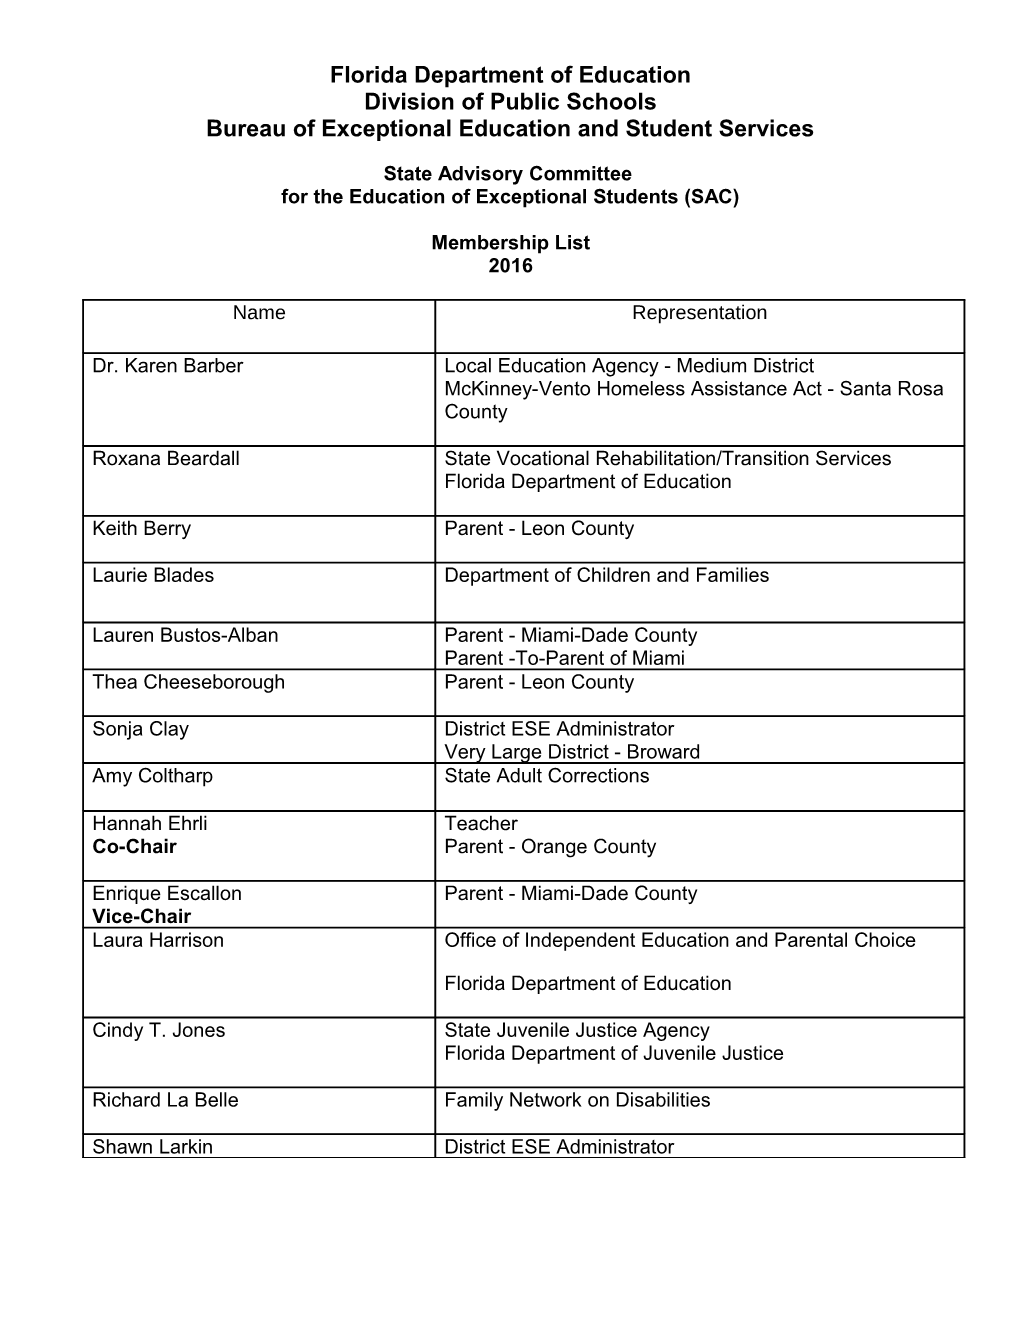 State Advisory Committee Membership List 2016 (Continued)